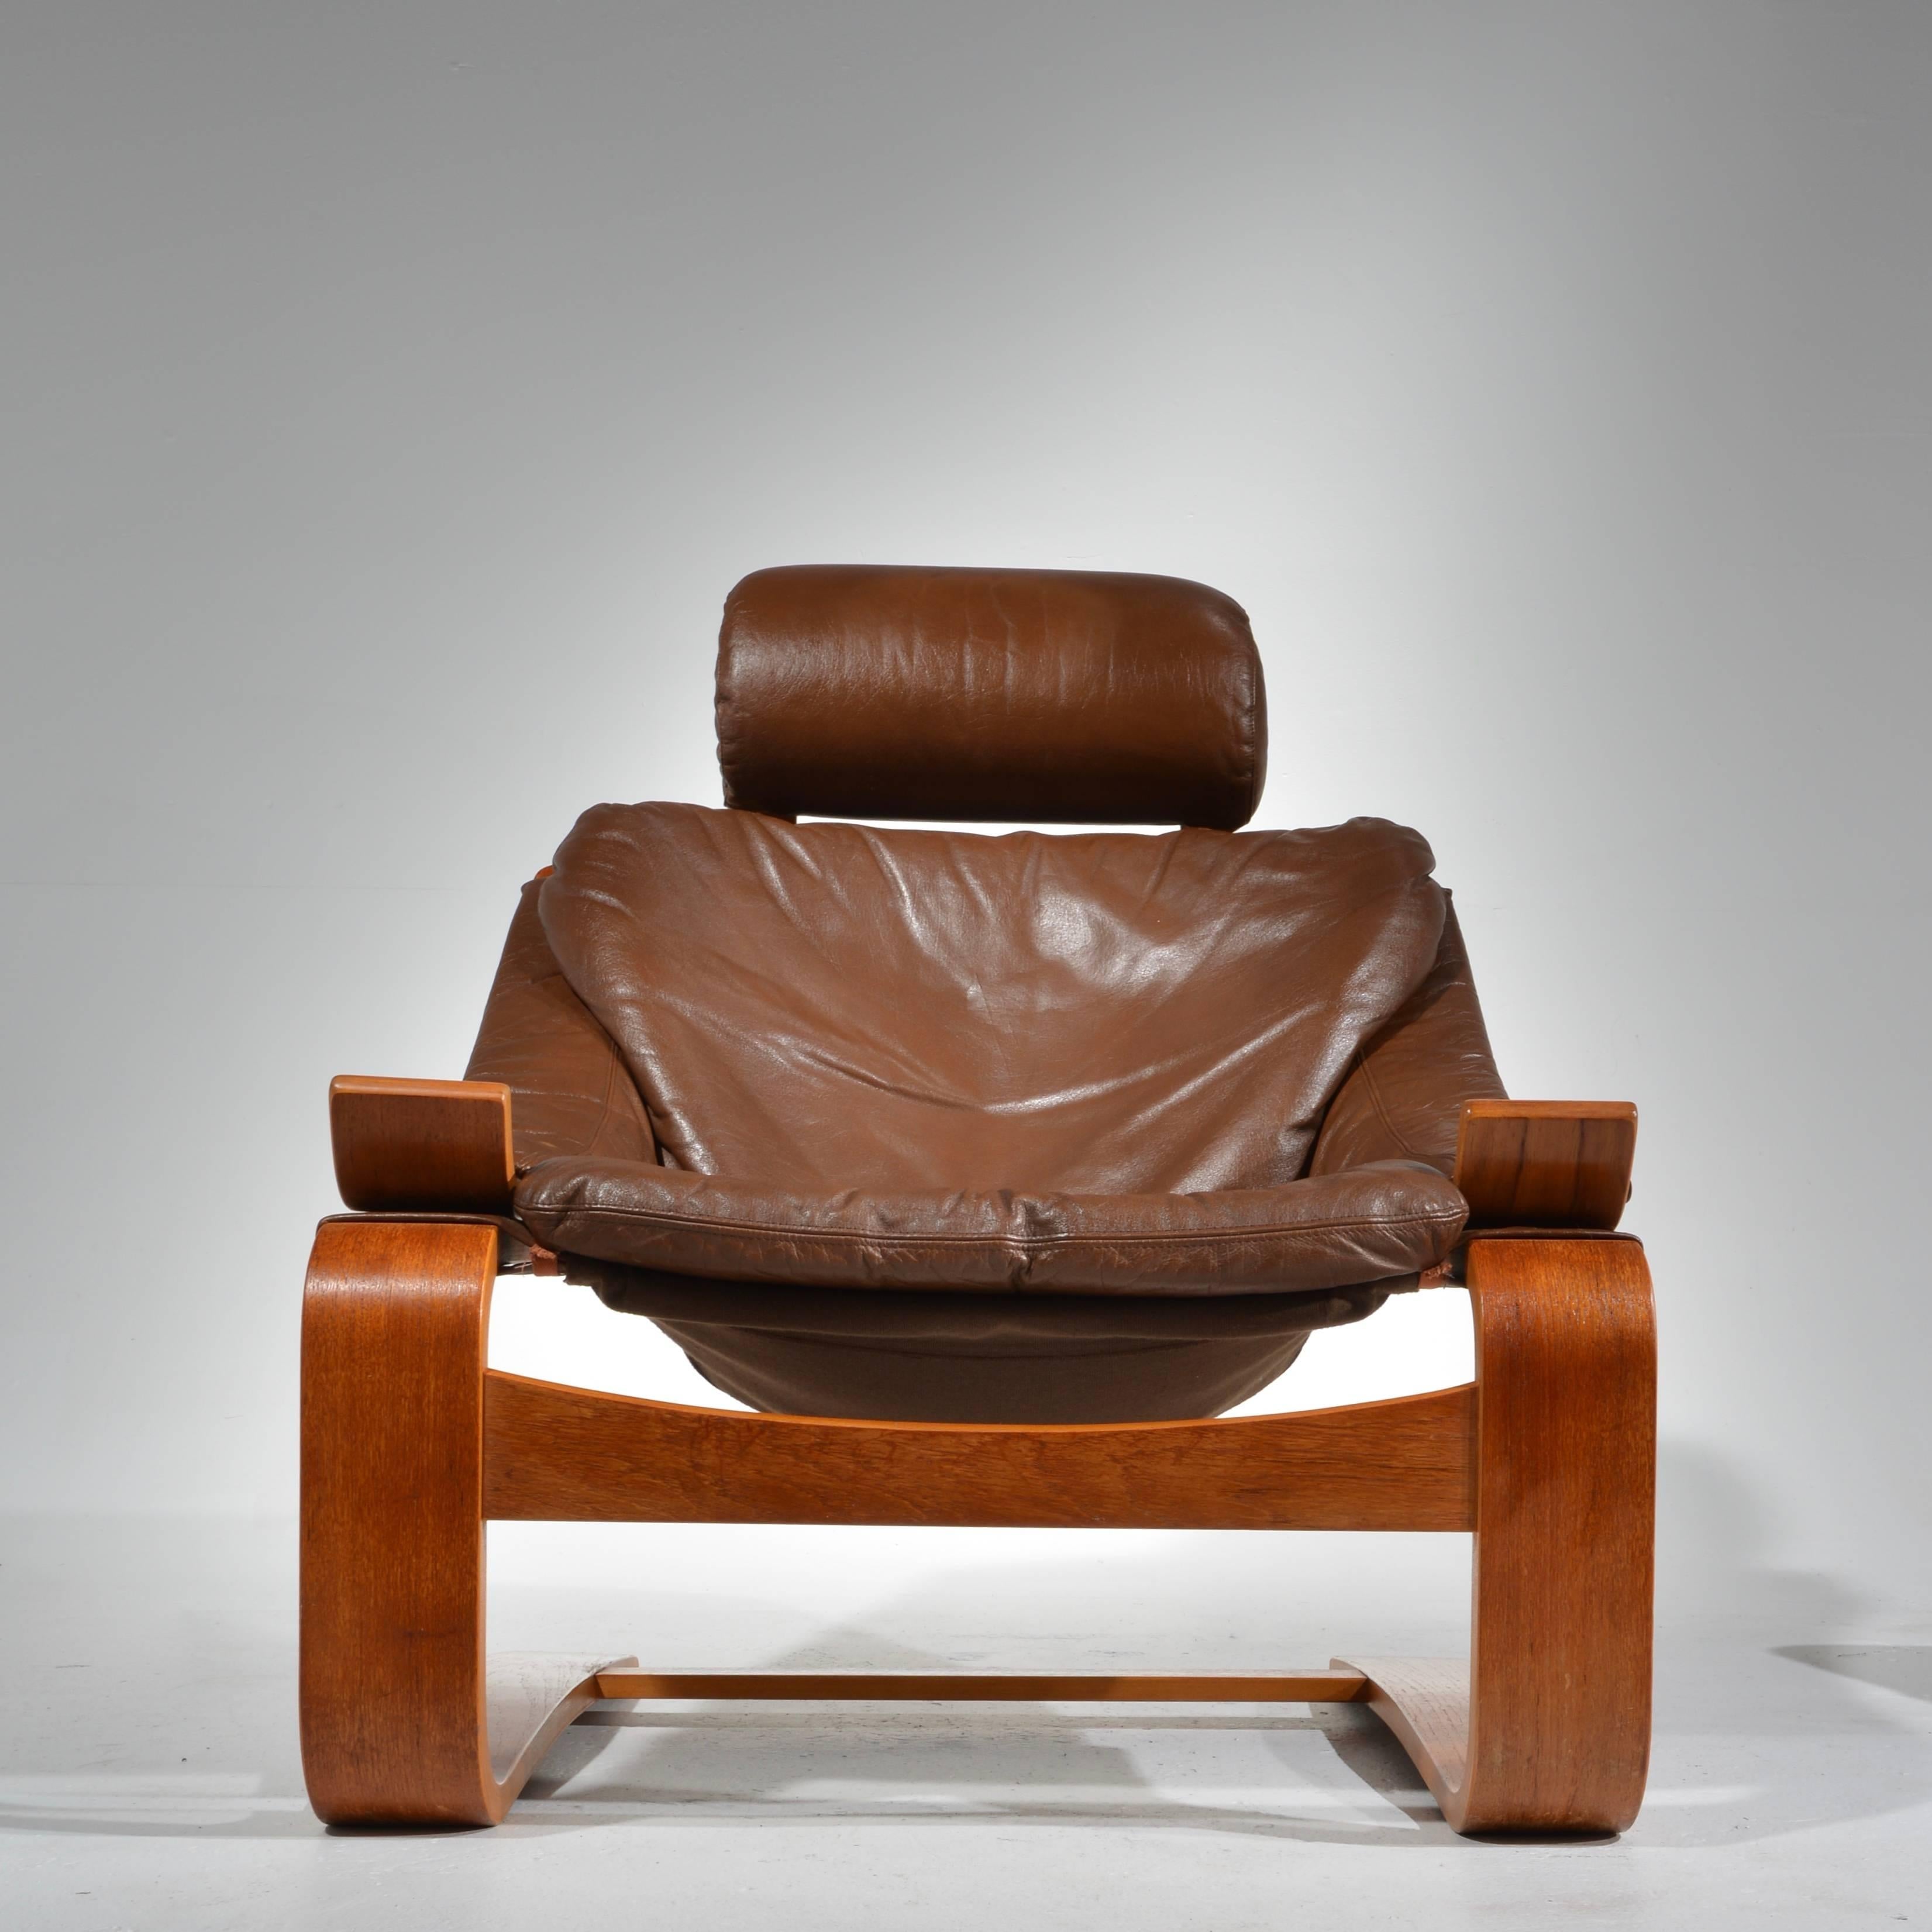 Swedish Kroken Teak and Leather Lounge Chair and Stool by Ake Fribytter for Nelo, Sweden